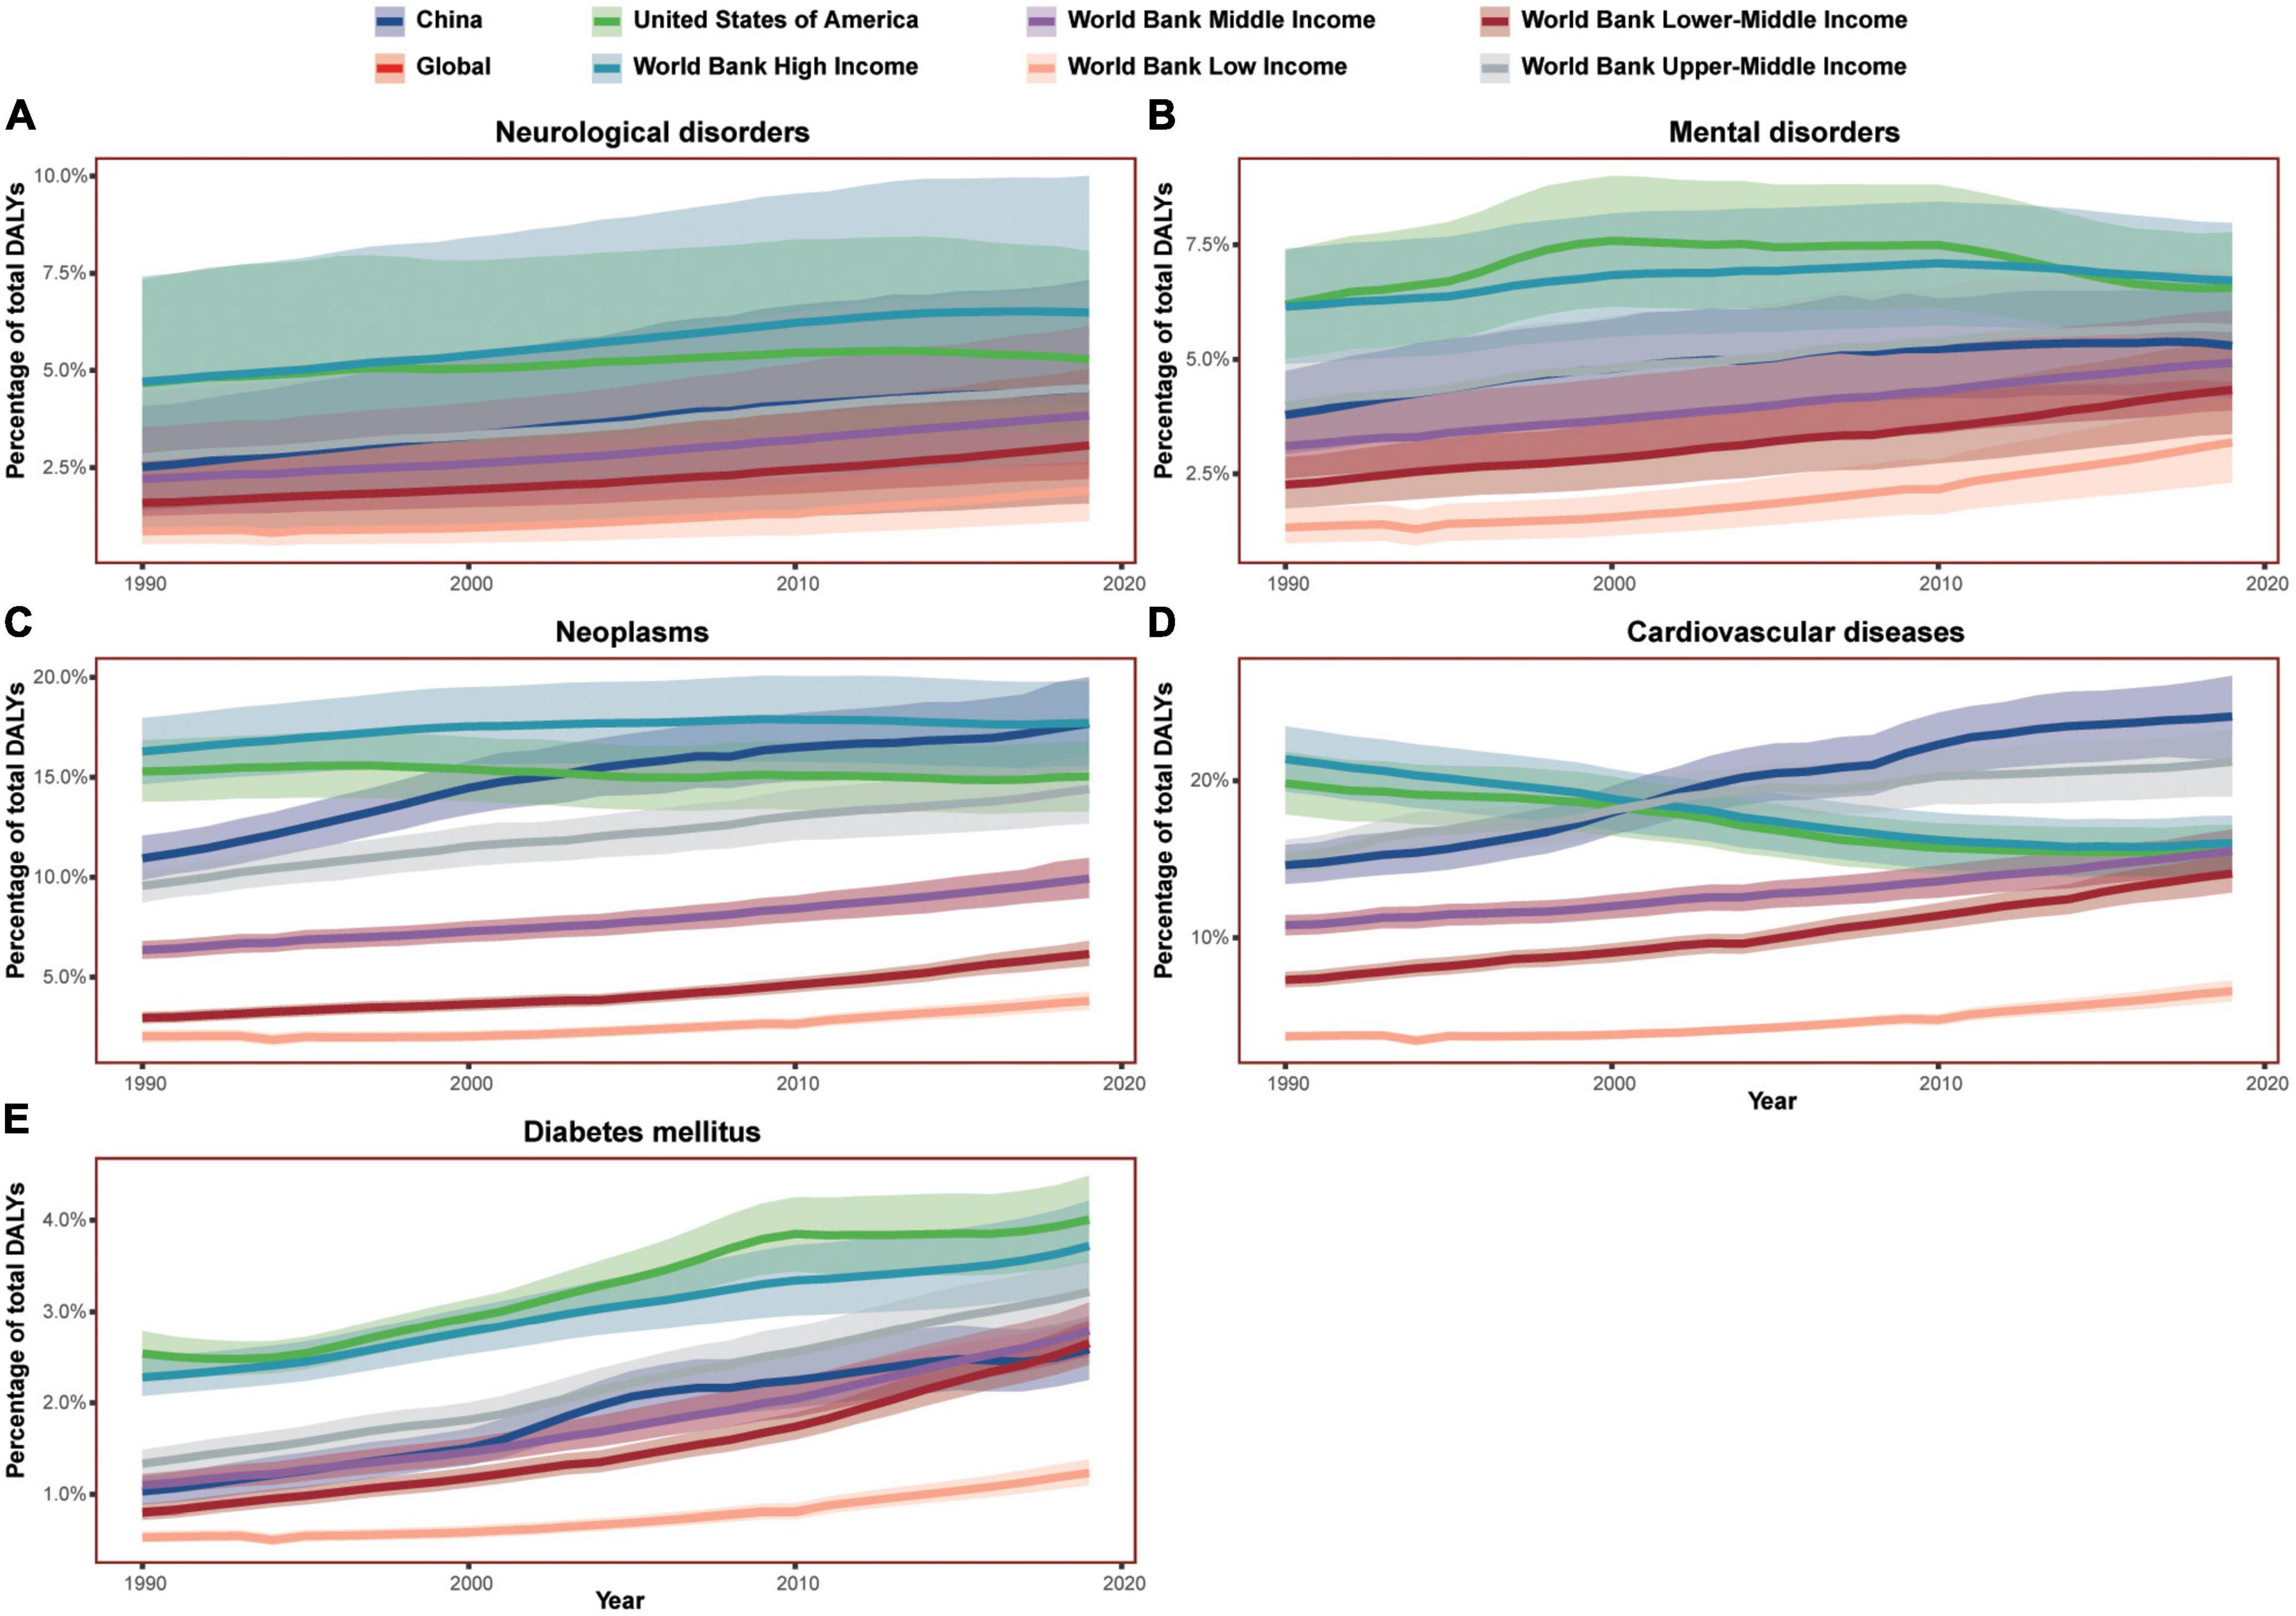 The different trends in the burden of neurological and mental disorders following dietary transition in China, the USA, and the world: An extension analysis for the Global Burden of Disease Study 2019